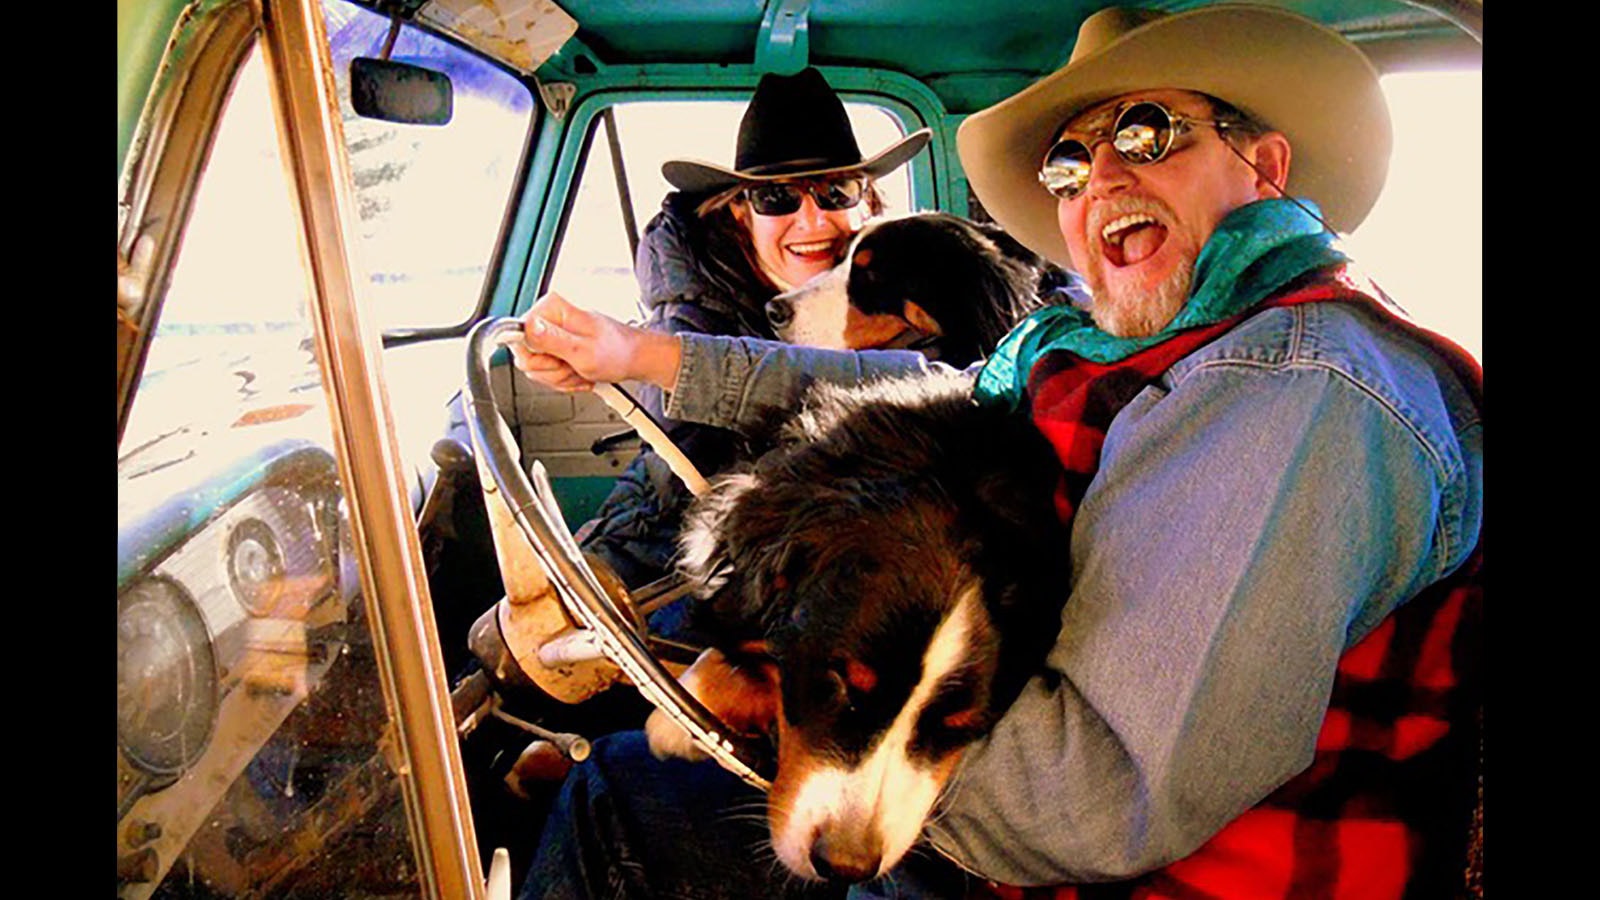 Craig Johnson has fun with the family, and the dogs.